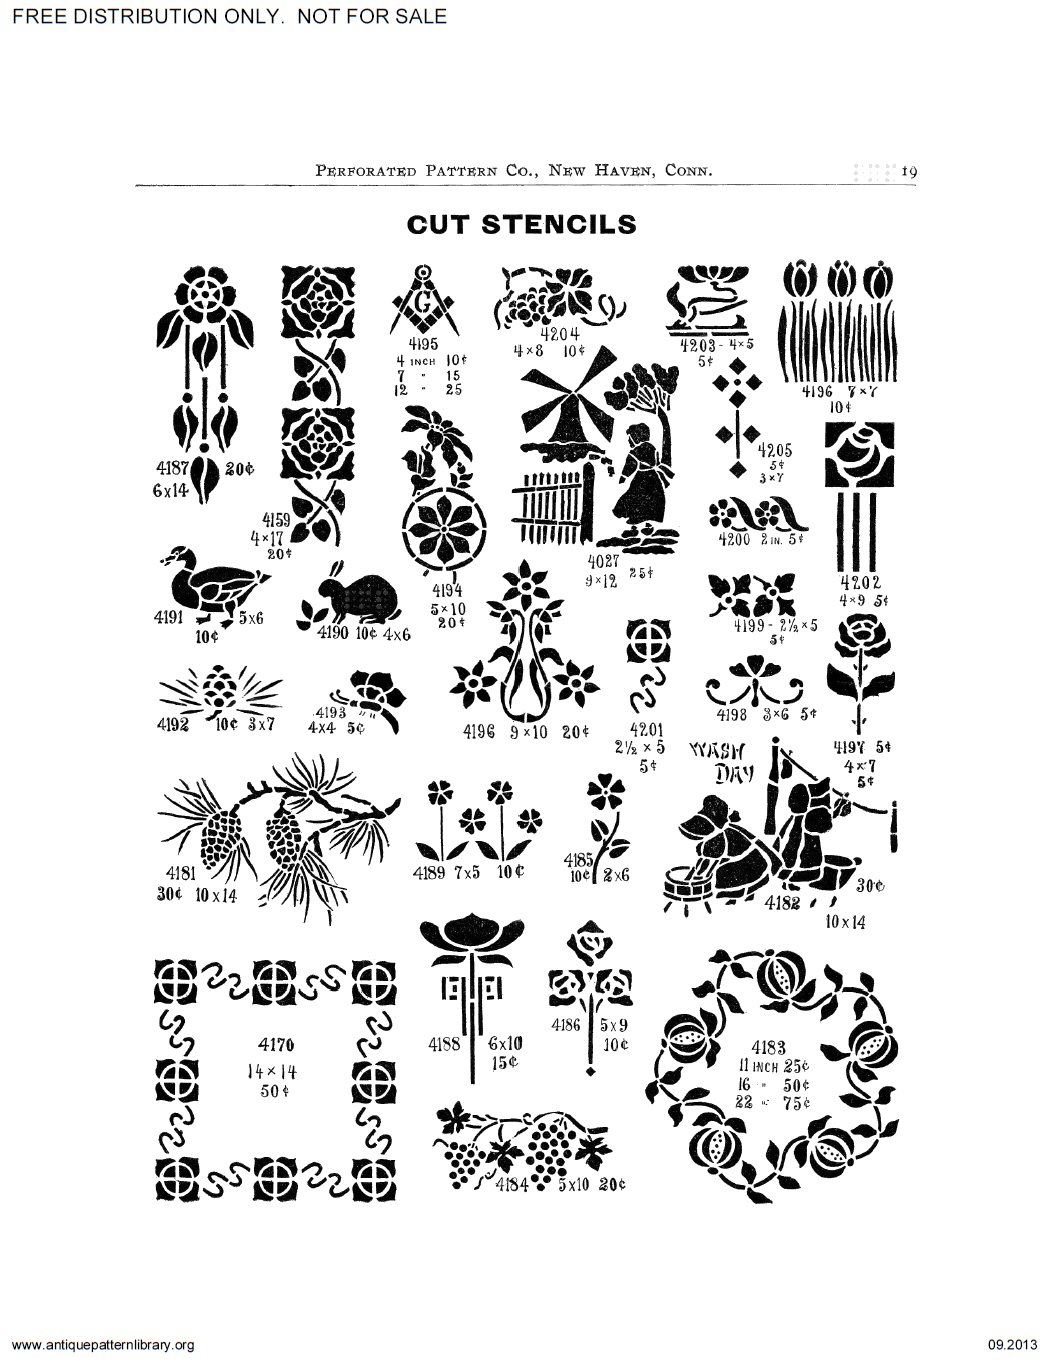 D-LP001 Perforated Stamping Patterns